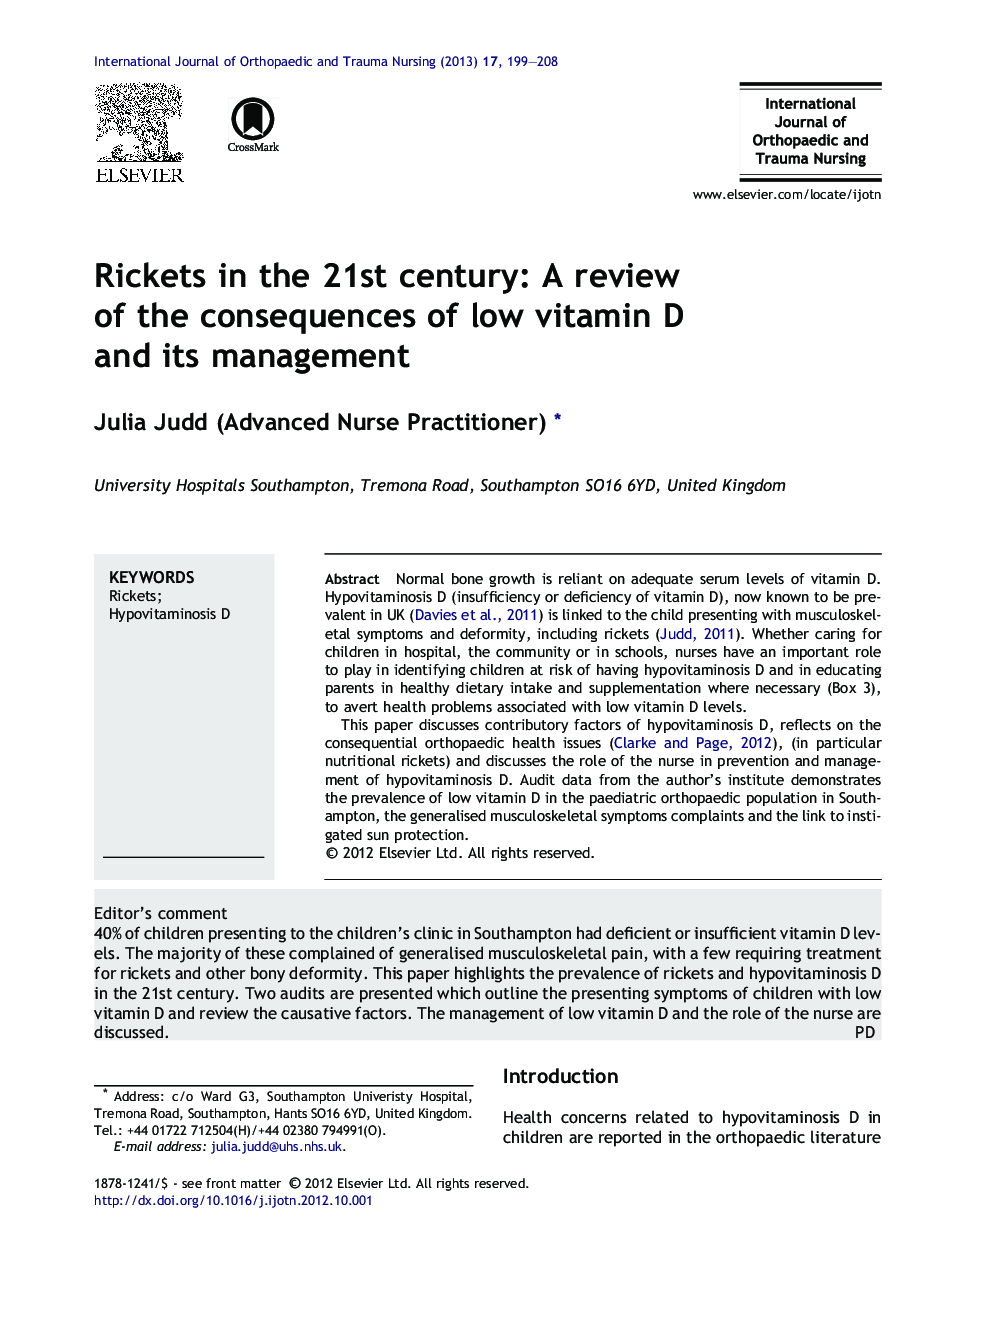 Rickets in the 21st century: A review of the consequences of low vitamin D and its management